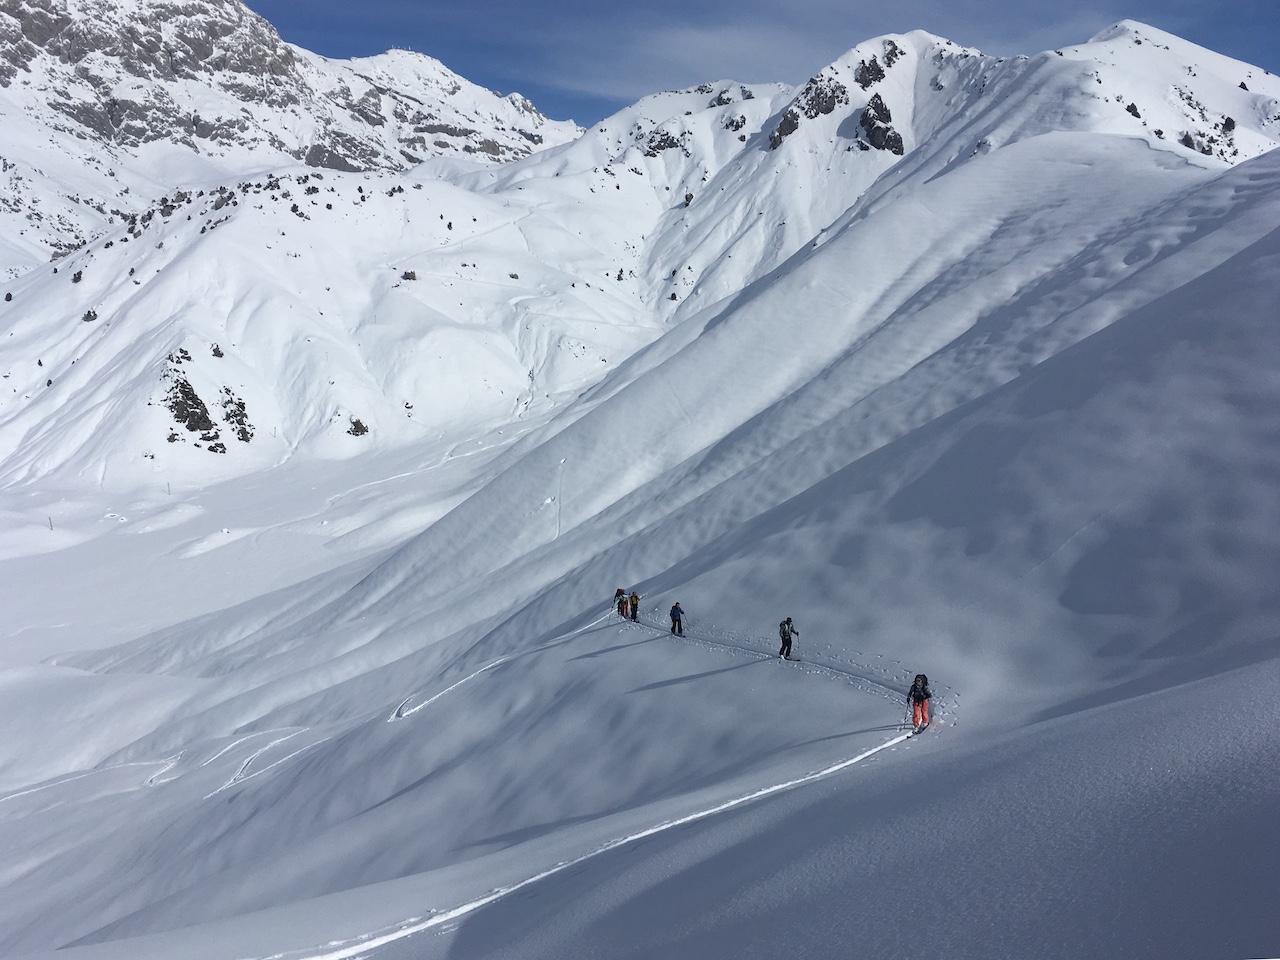 Students in backcountry skiing class in the mountains above Arslanbob, Kyrgyzstan.